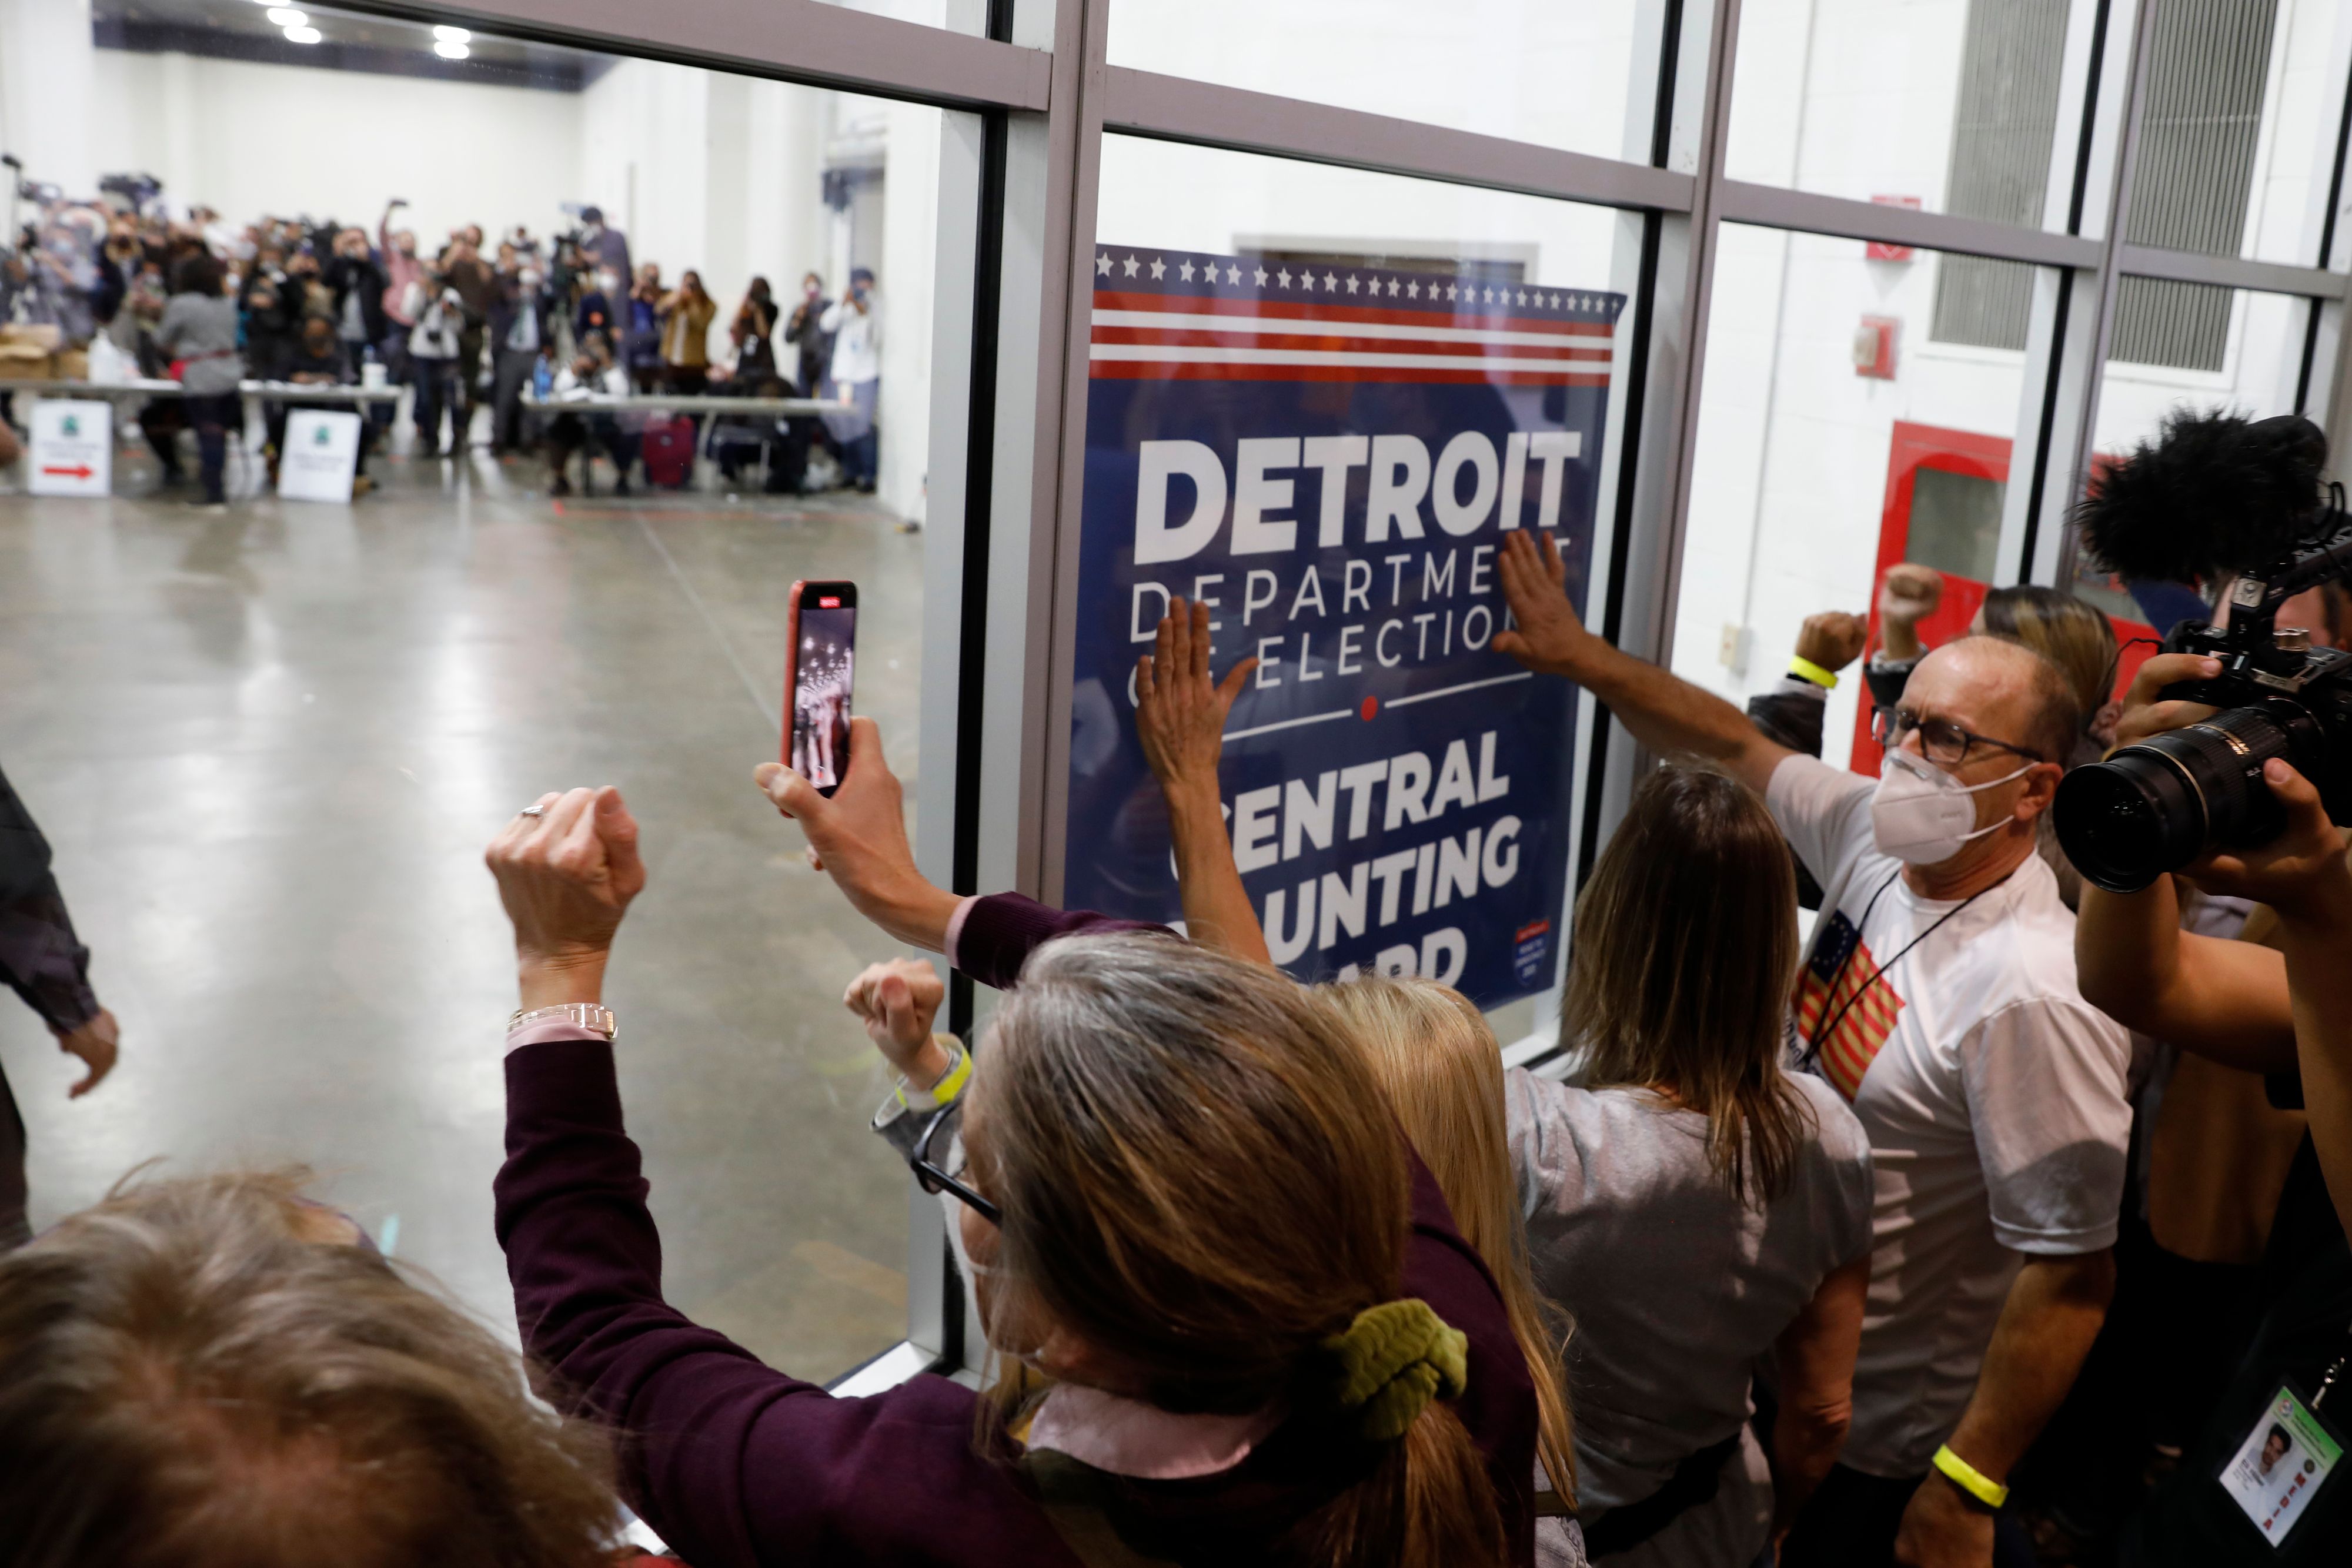 Supporters of  President Donald Trump bang on the glass during a protest outside a room where absentee ballots were being counted at the TCF Center in Detroit on Nov. 4, 2020. (Jeff Kowalsky—AFP/Getty Images)